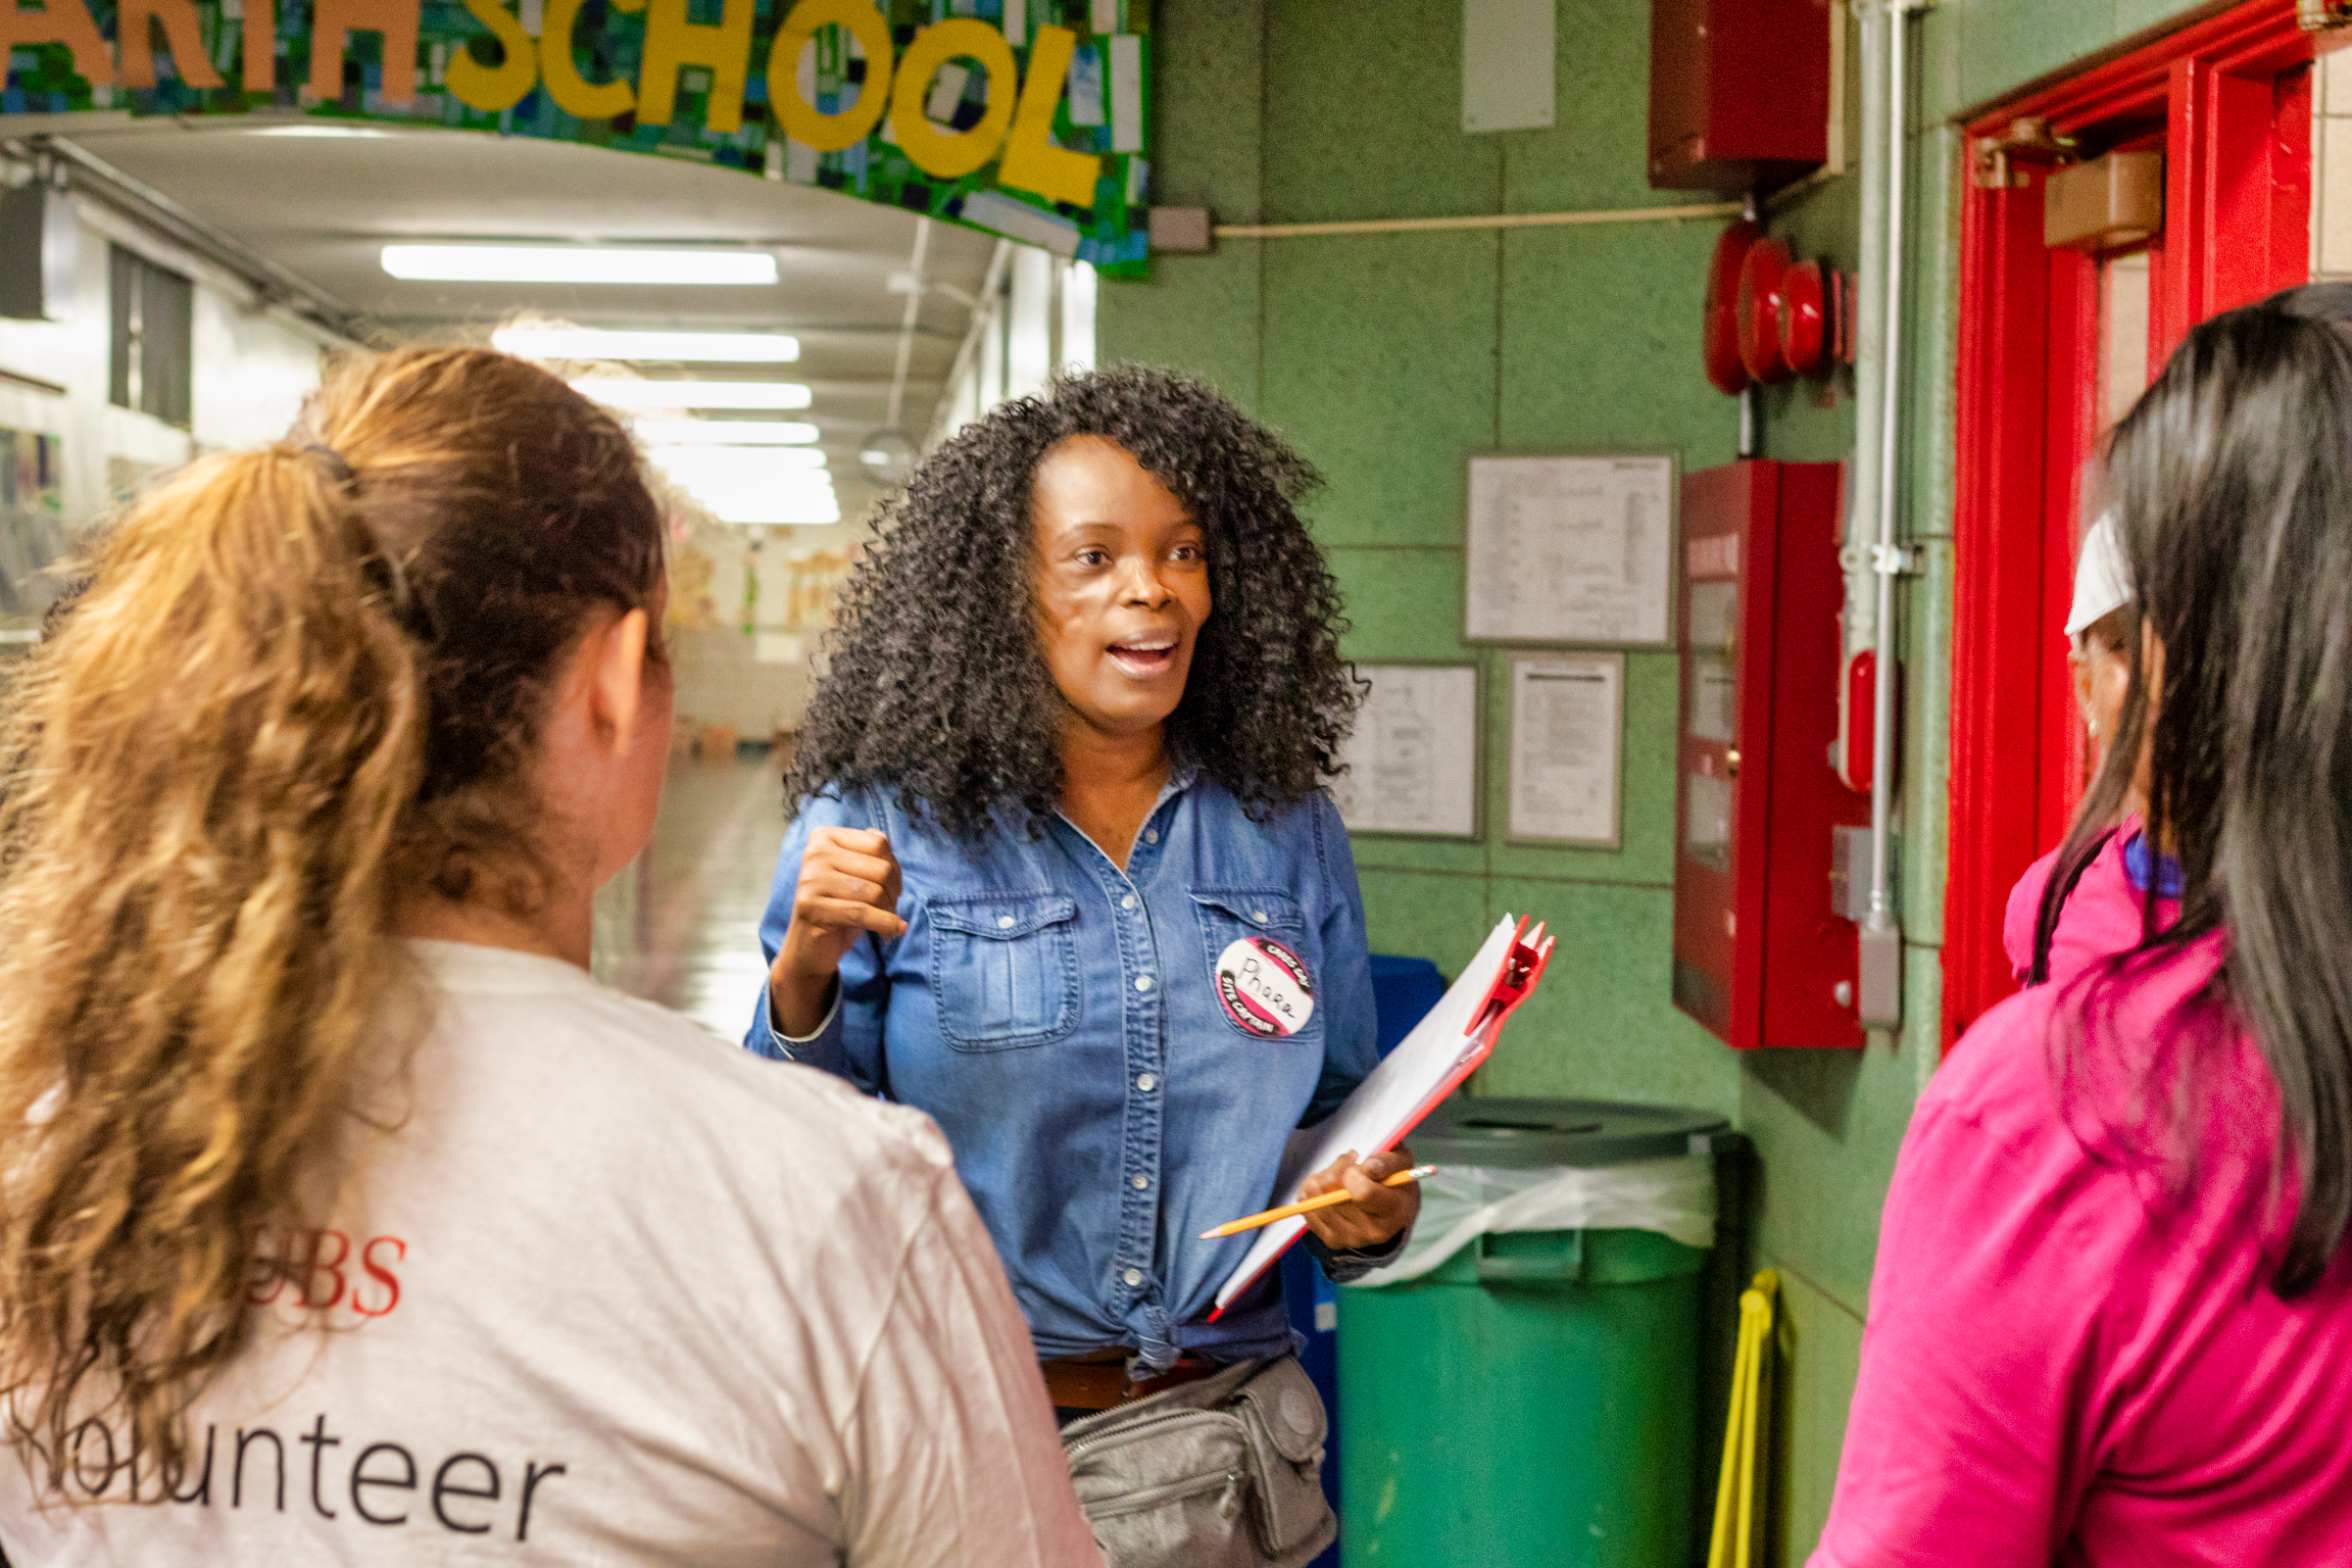 A woman with a clipboard speaks to two volunteers in a school hallway